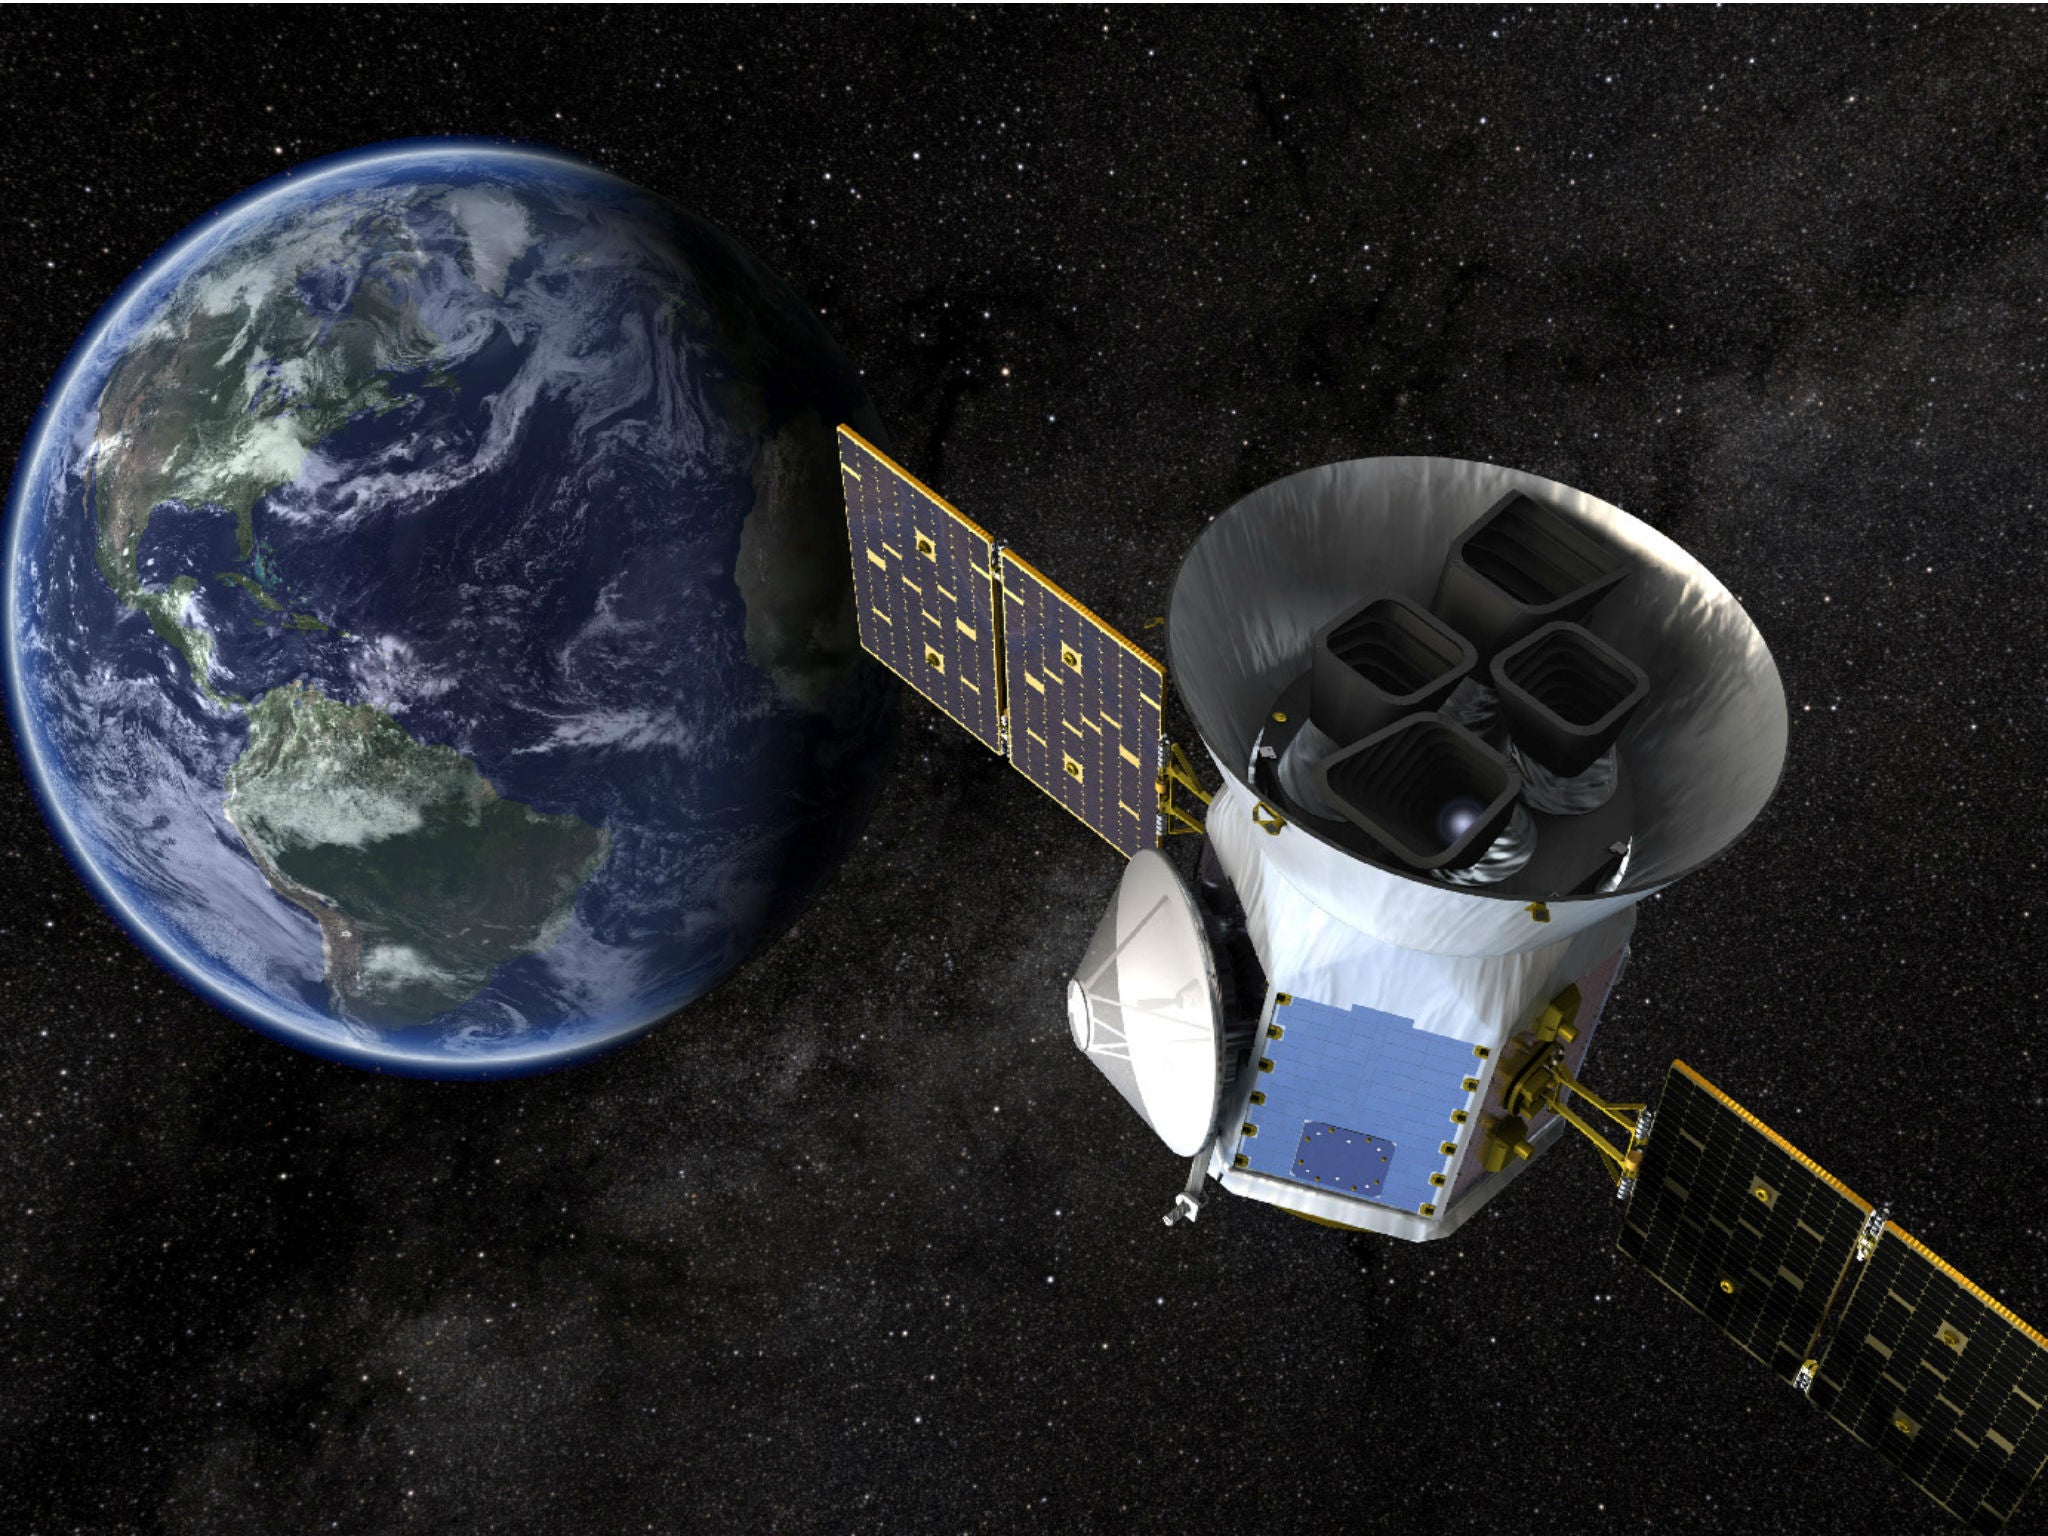 TESS, the Transiting Exoplanet Survey Satellite, is shown in this conceptual illustration